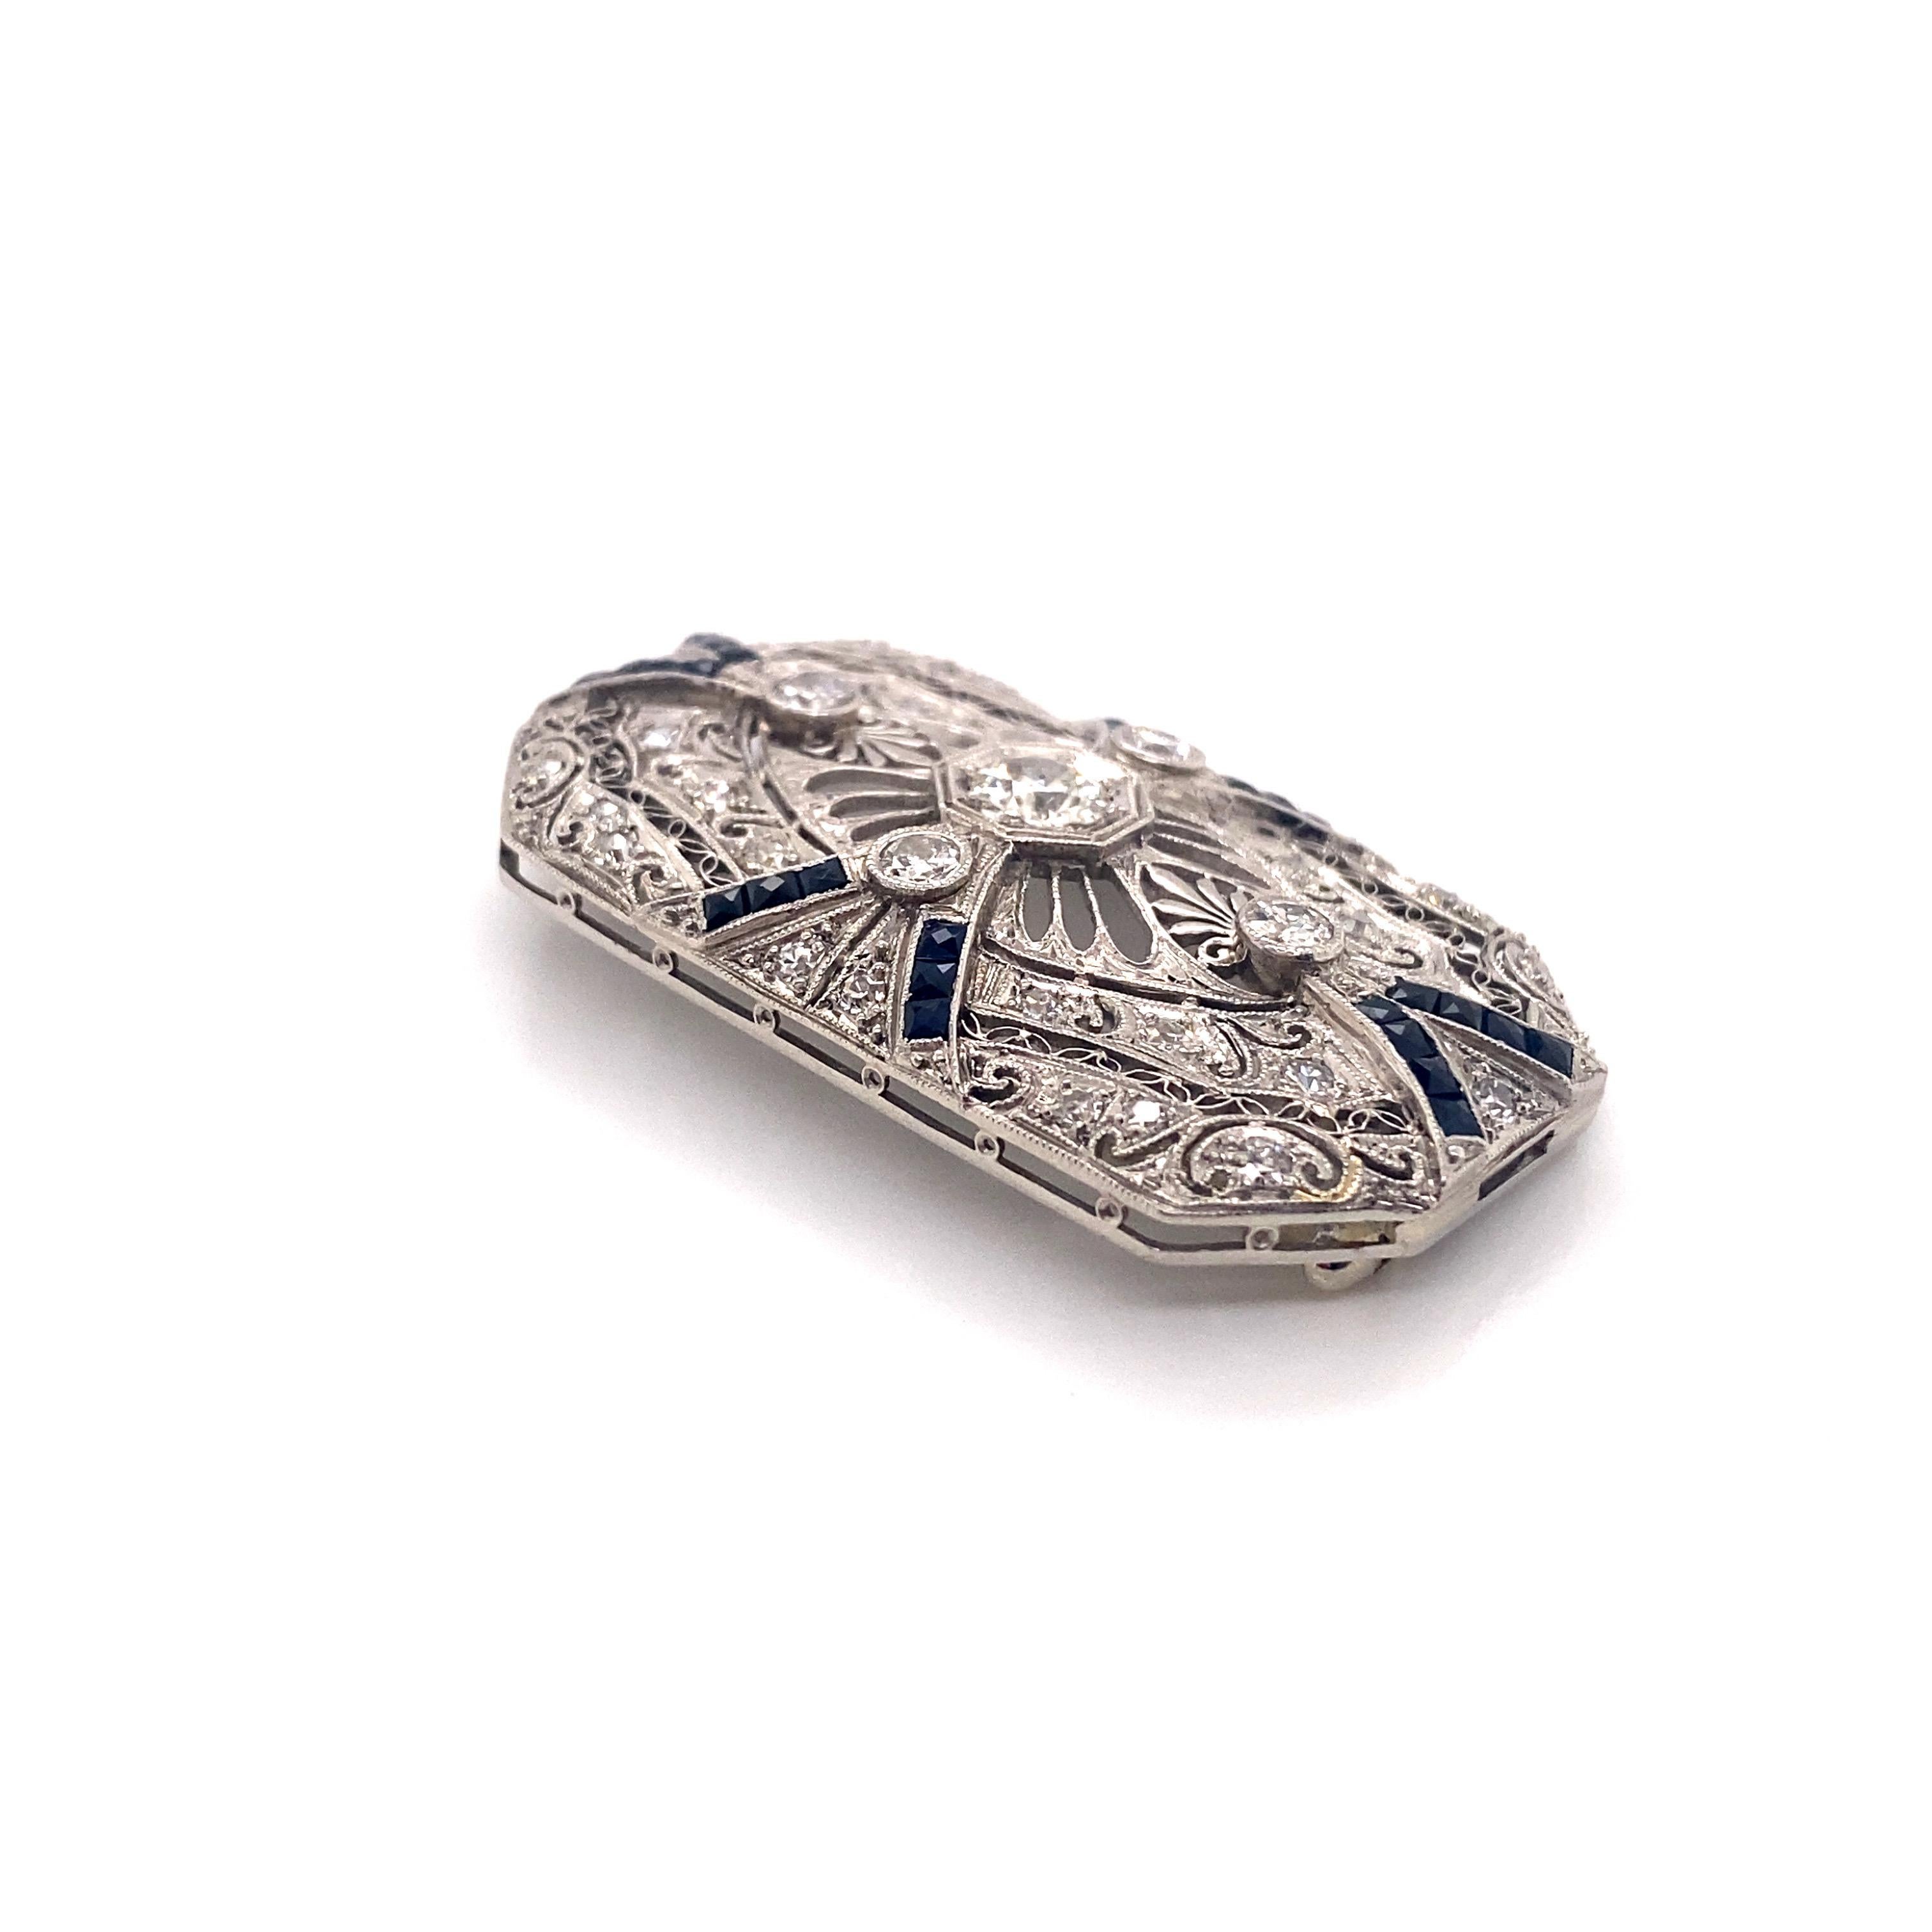 Vintage Edwardian Platinum Diamond and Sapphire Filigree Brooch In Good Condition For Sale In Boston, MA